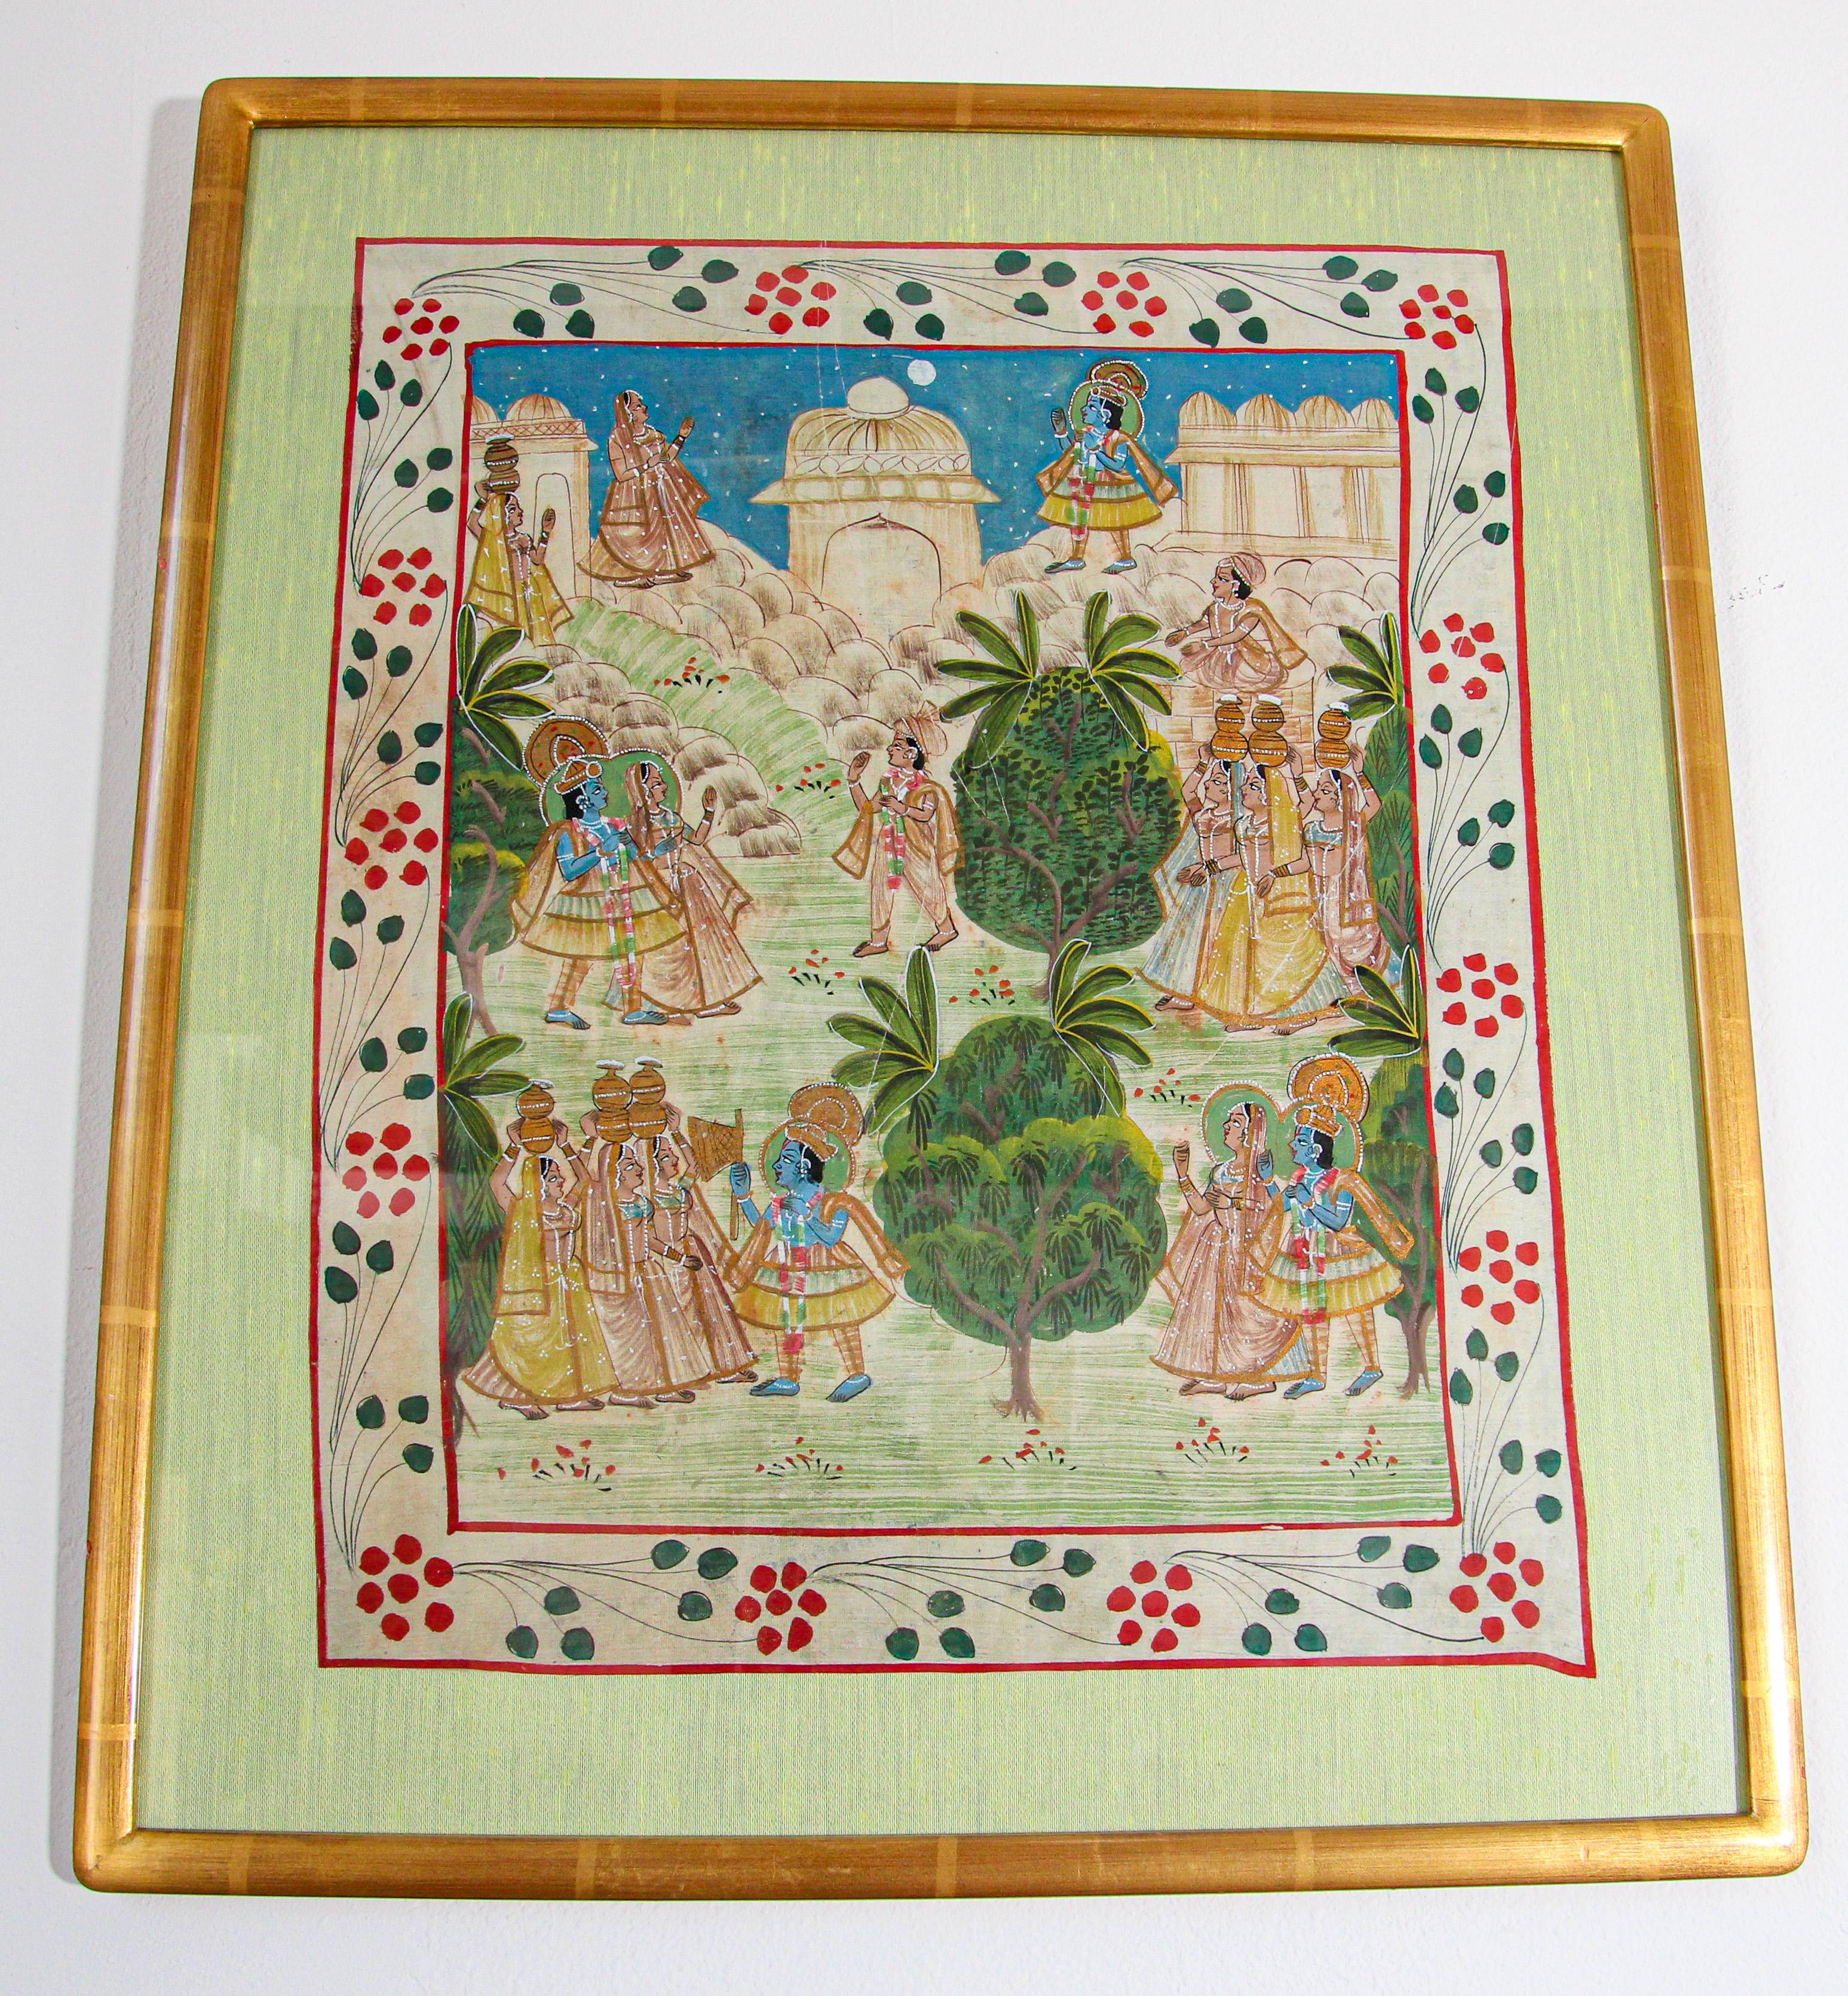 Krishna, Radha, and the Gopis meet a young prince painting
Pichhavai painting depicting Krishna, Radha, and the Gopis meeting a young prince.
Krishna with female Gopis carrying offering for the prince, great washed out colors.
Stylized floral motifs